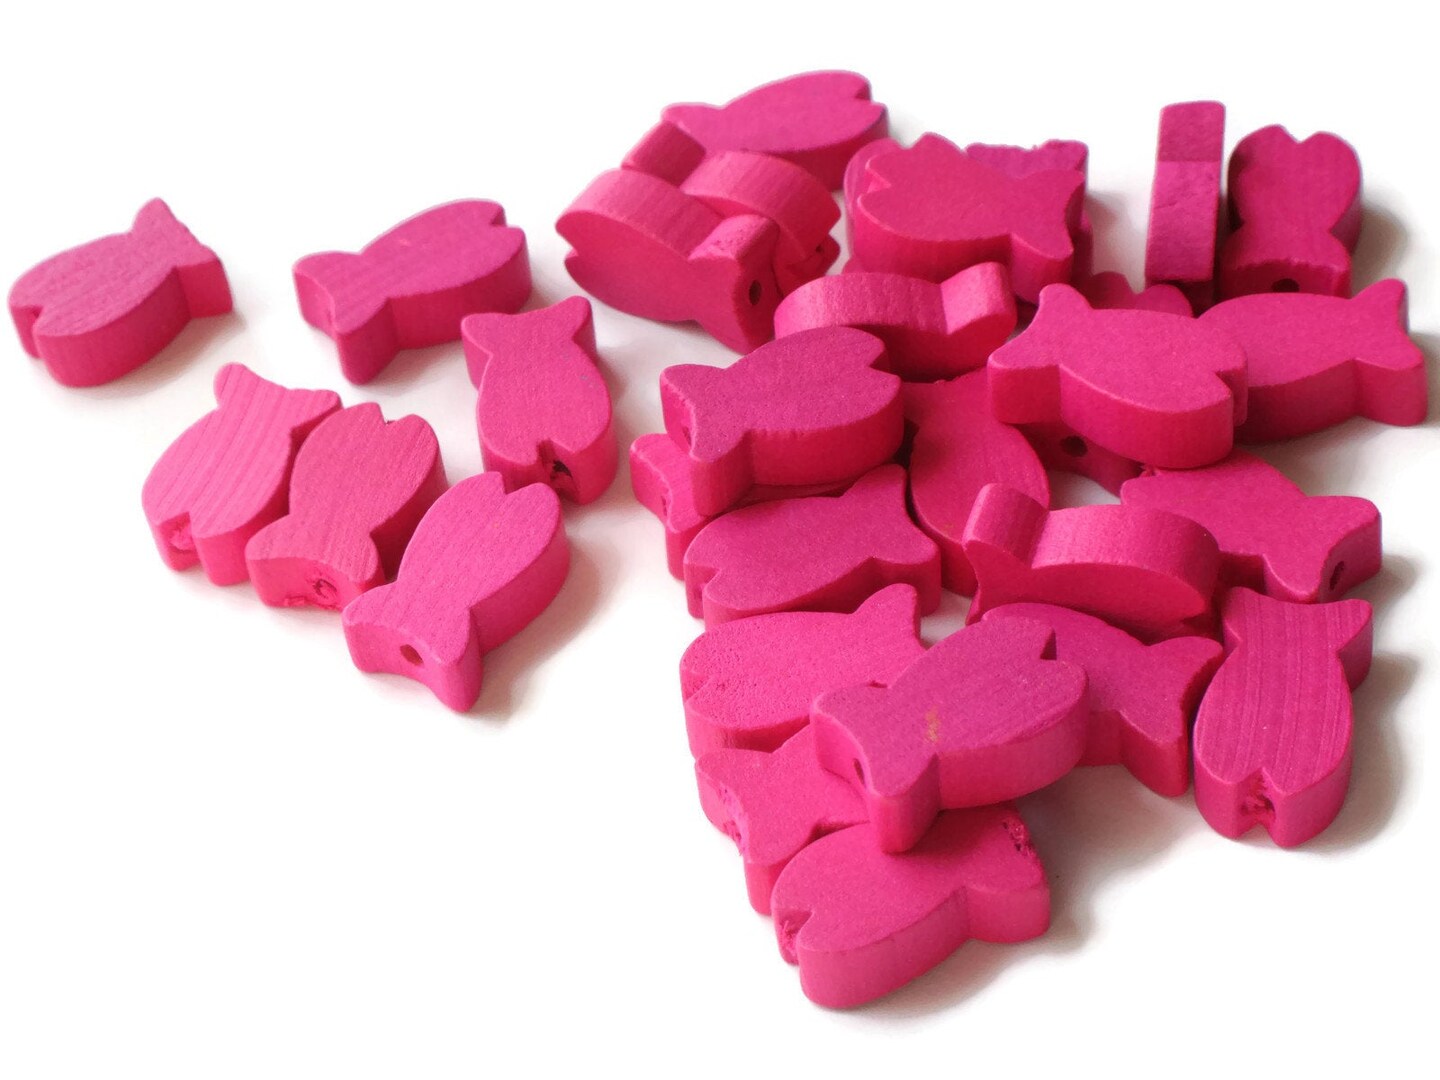 30 19mm Bright Pink Beads Wooden Fish Beads Wood Beads Animal Beads